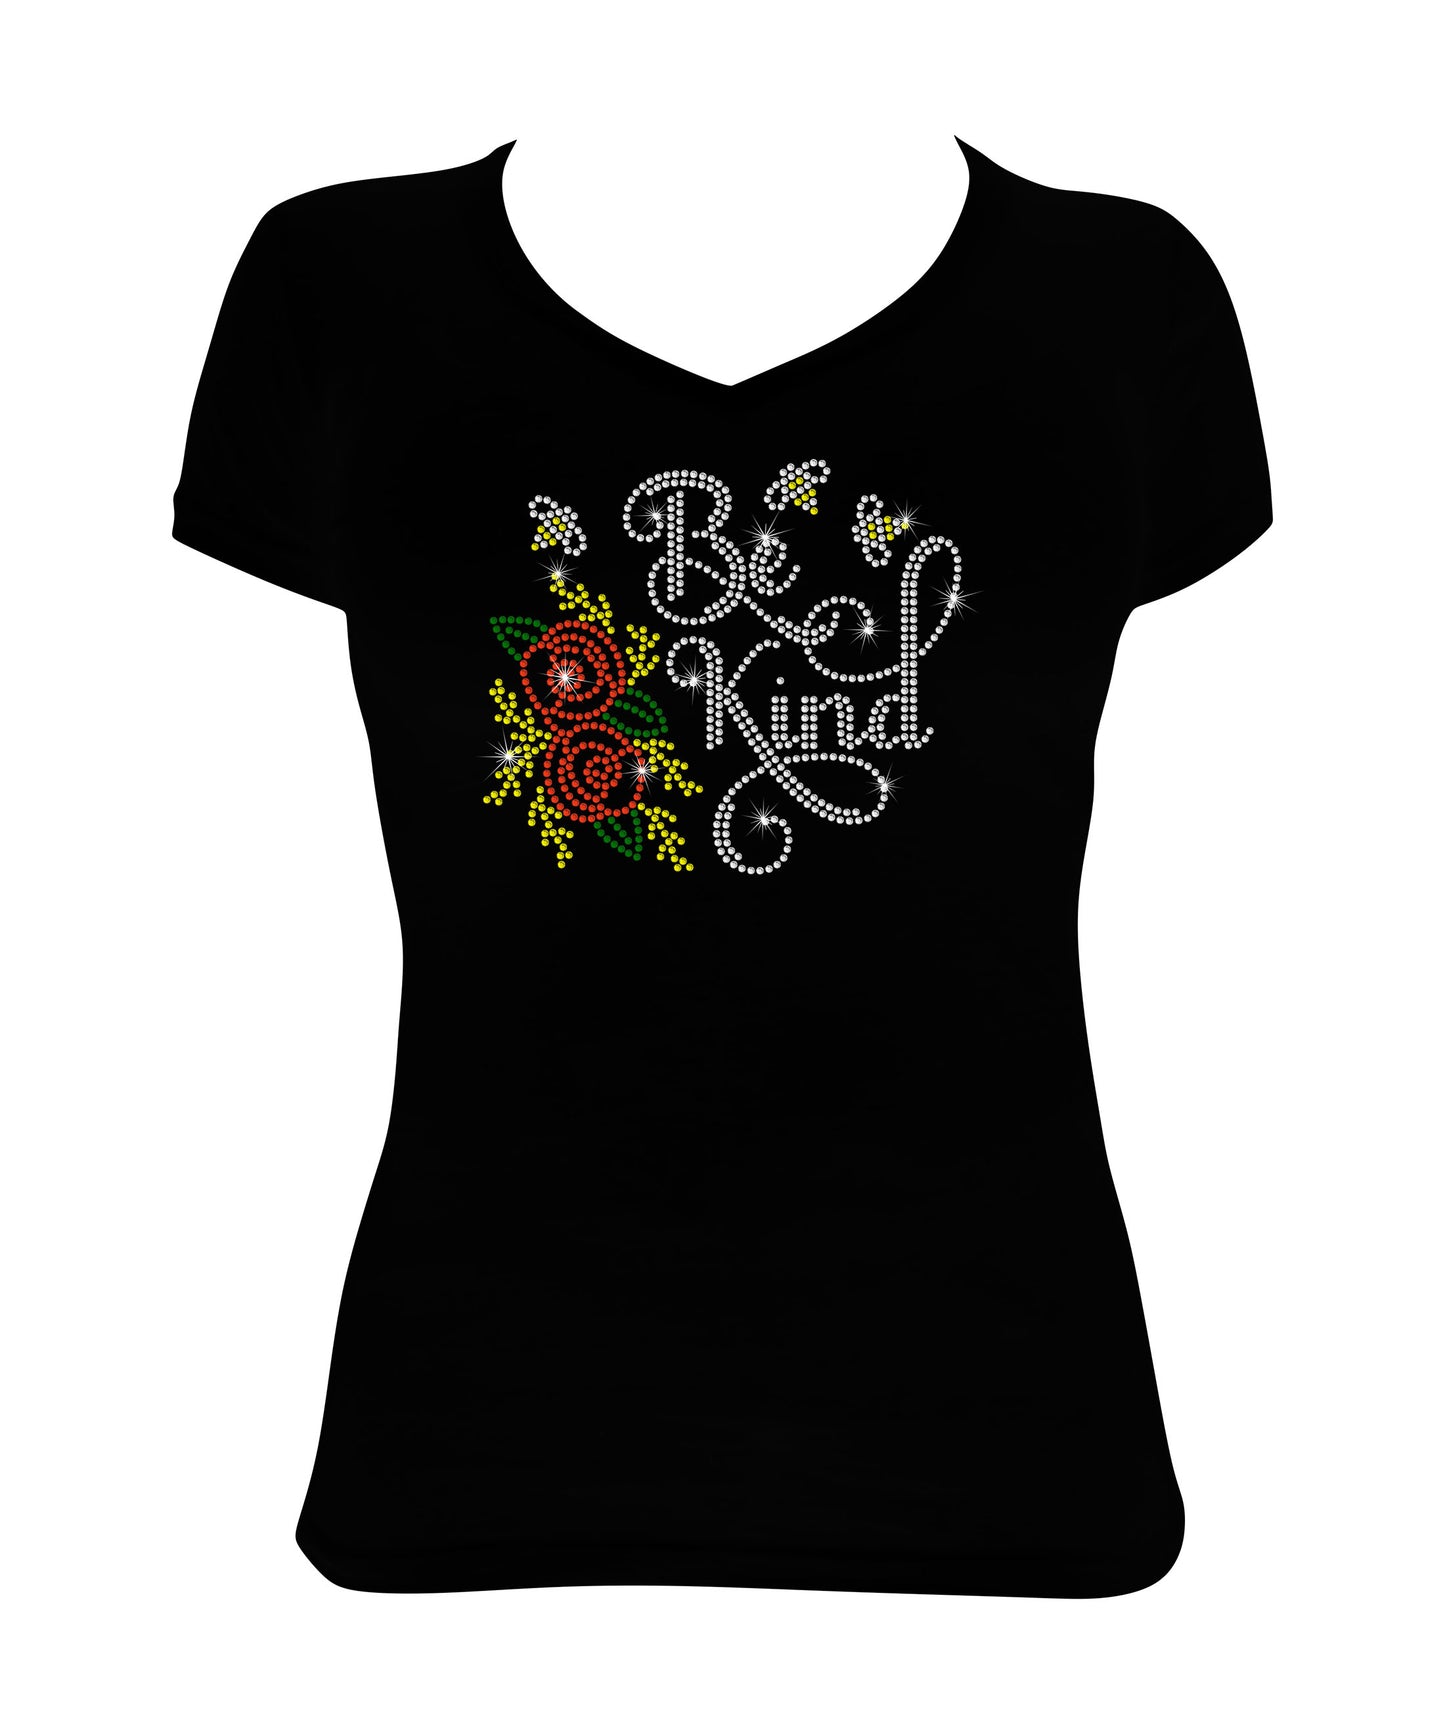 Be Kind with Red Rose & Bees - Rhinestone Shirt